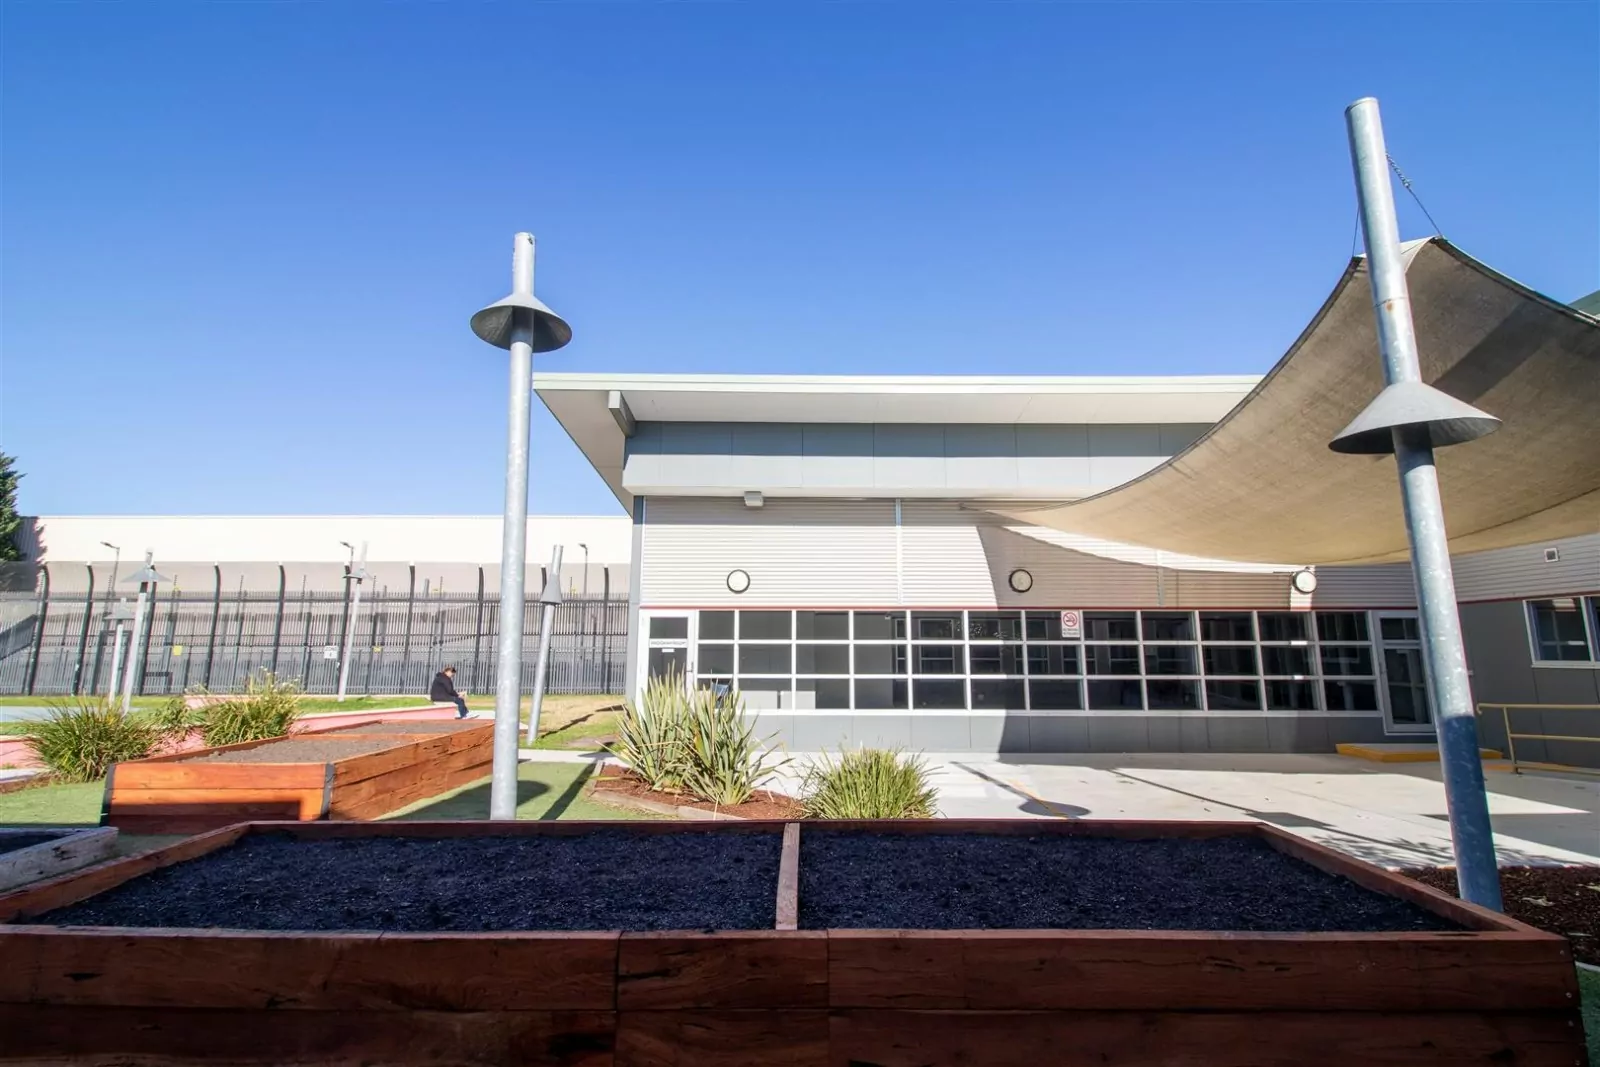 The Maribyrnong Transition Centre providing emergency parolee accommodation for the Department of Justice and Community Safety (DJCS). A person sits in the grass courtyard adjacent to a tall, fenced and secure facility. There are wood paneled flowerbeds with native paints.